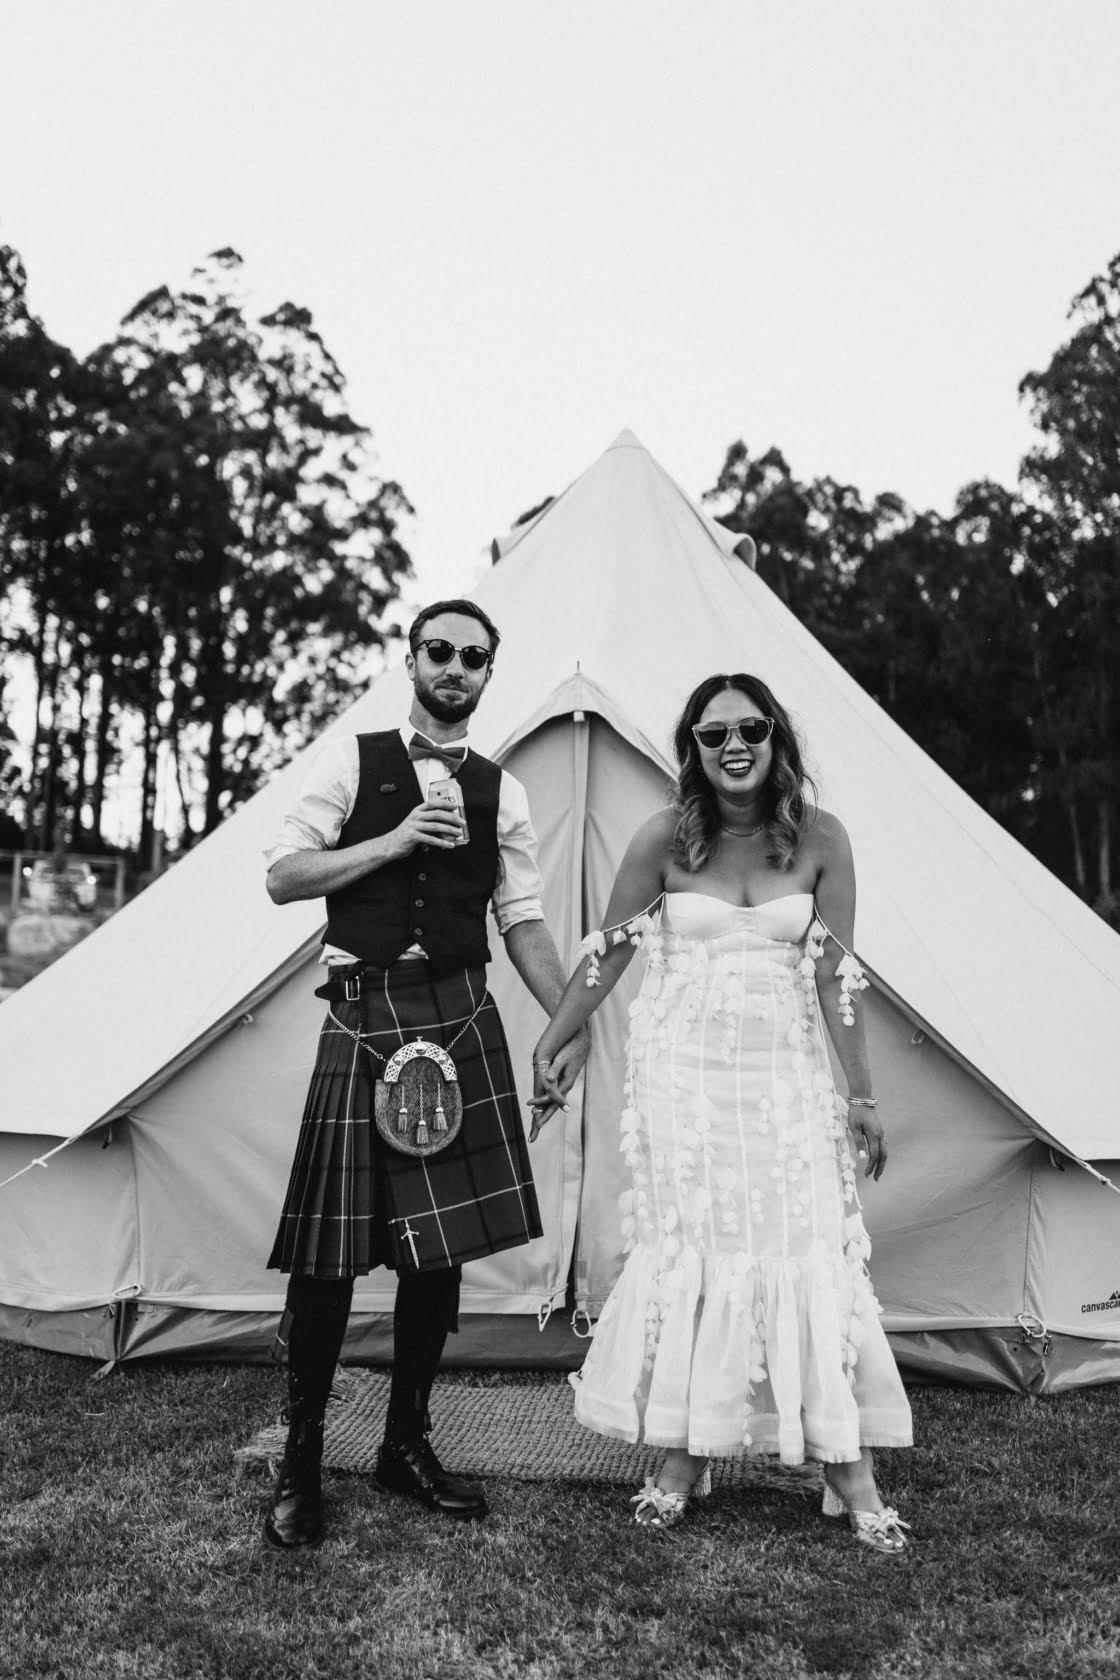 SHANNON & ANDREW'S YARRA VALLEY WEDDING – Hello May